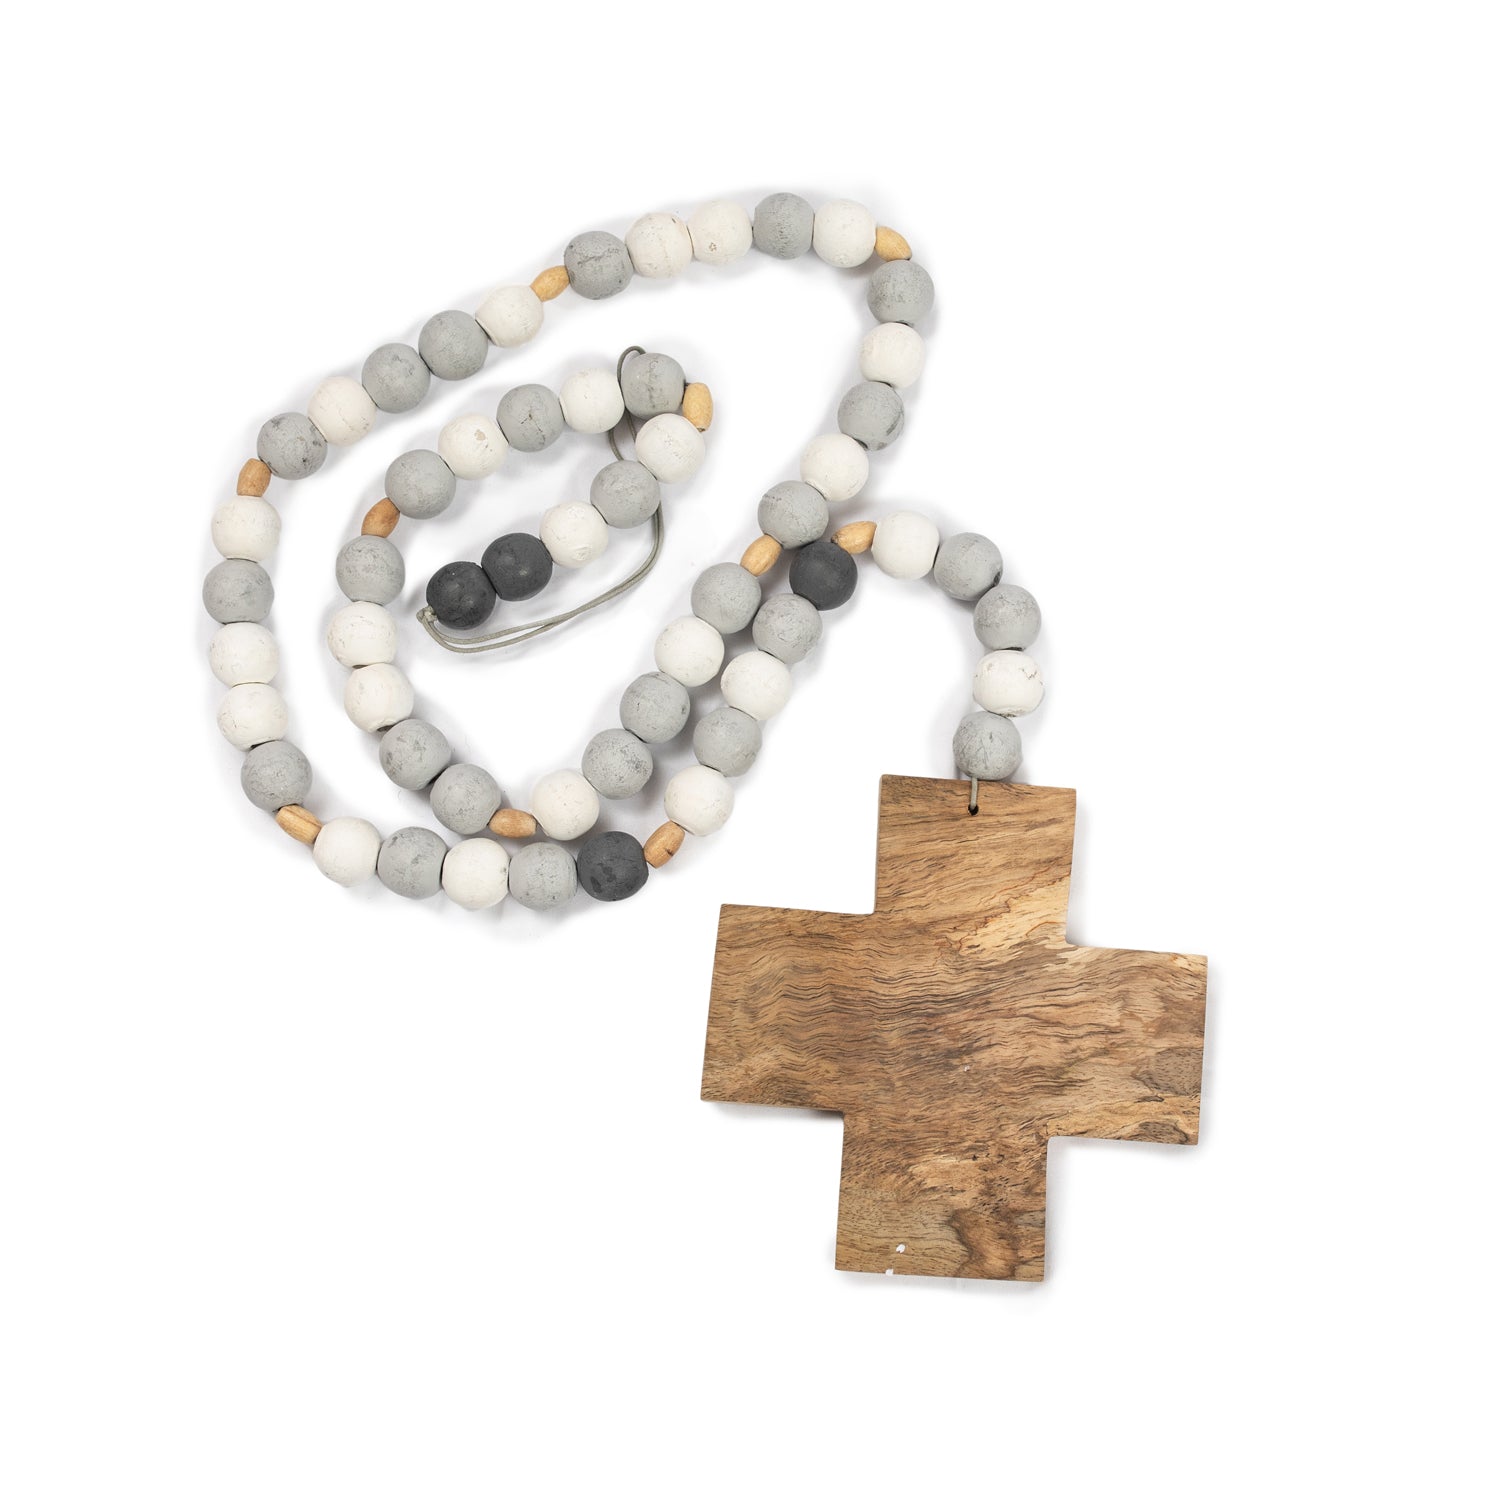 Sugarboo & Co. - Bead Strand with Cross - Grey + Natural Wood